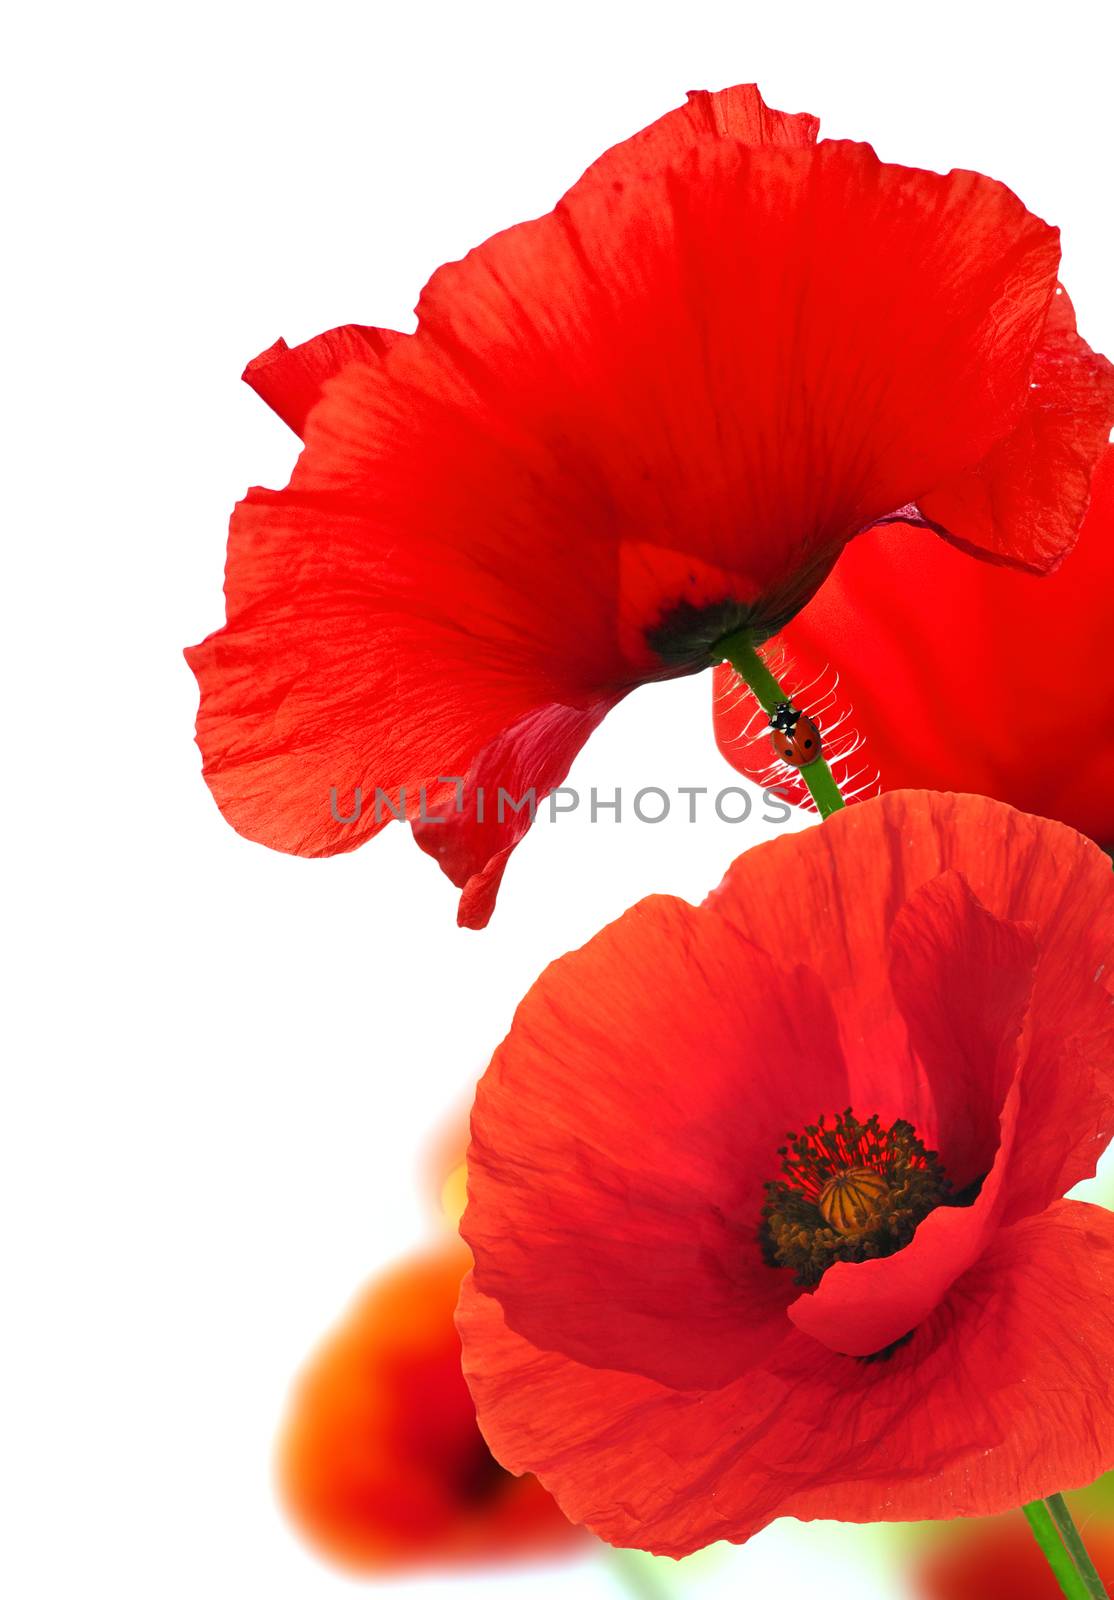 Red poppies over white background with a ladybird climbing along the stem of one flower